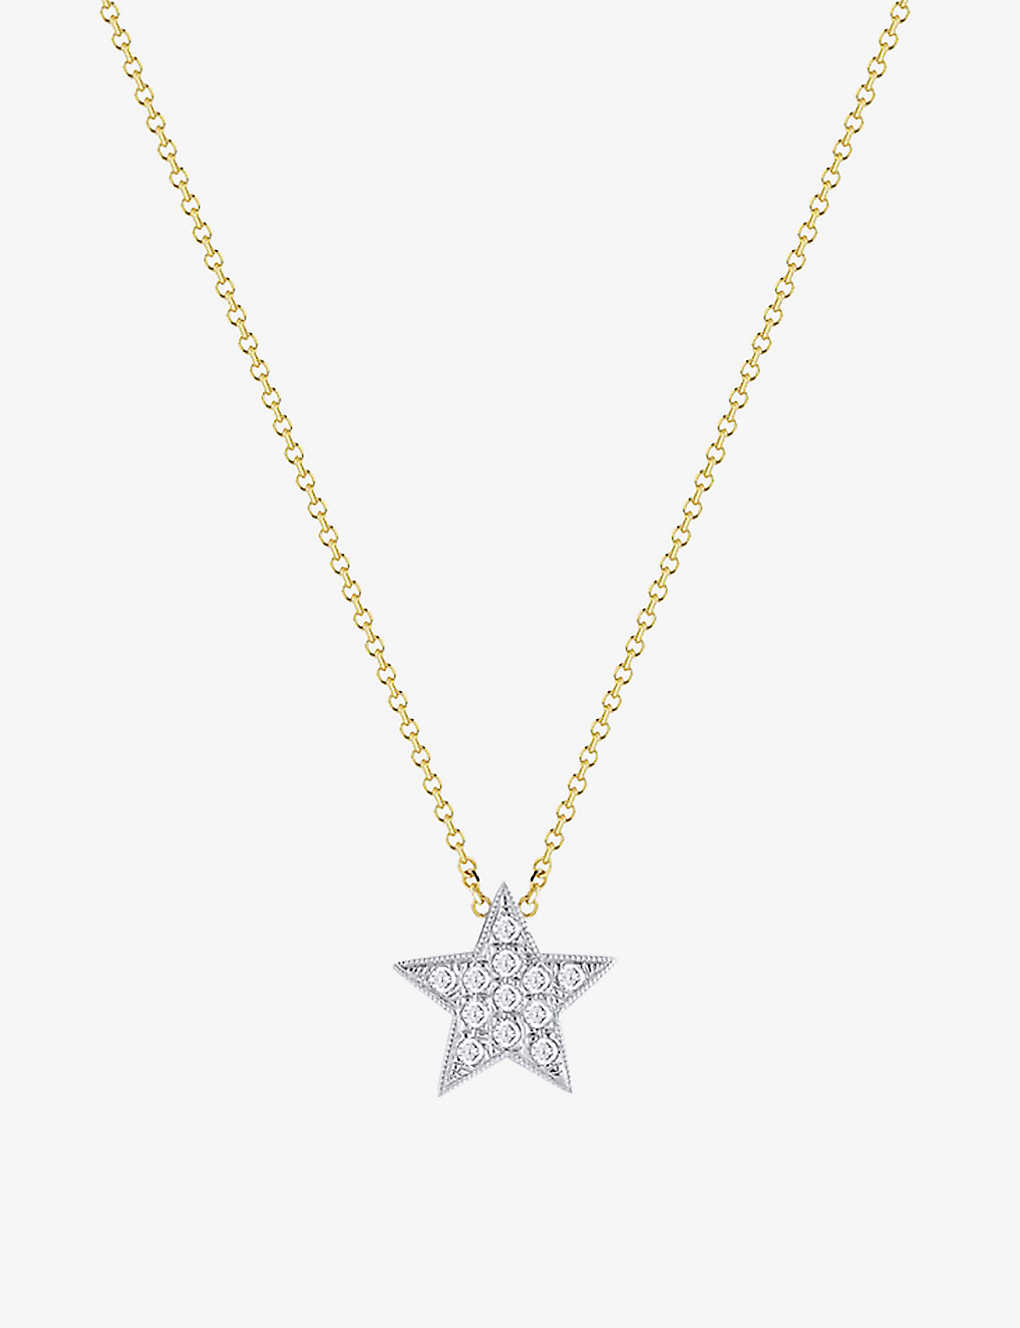 The Alkemistry Dana Rebecca Julianna Himiko 14ct Yellow-gold And Diamond Necklace In Yellow Gold